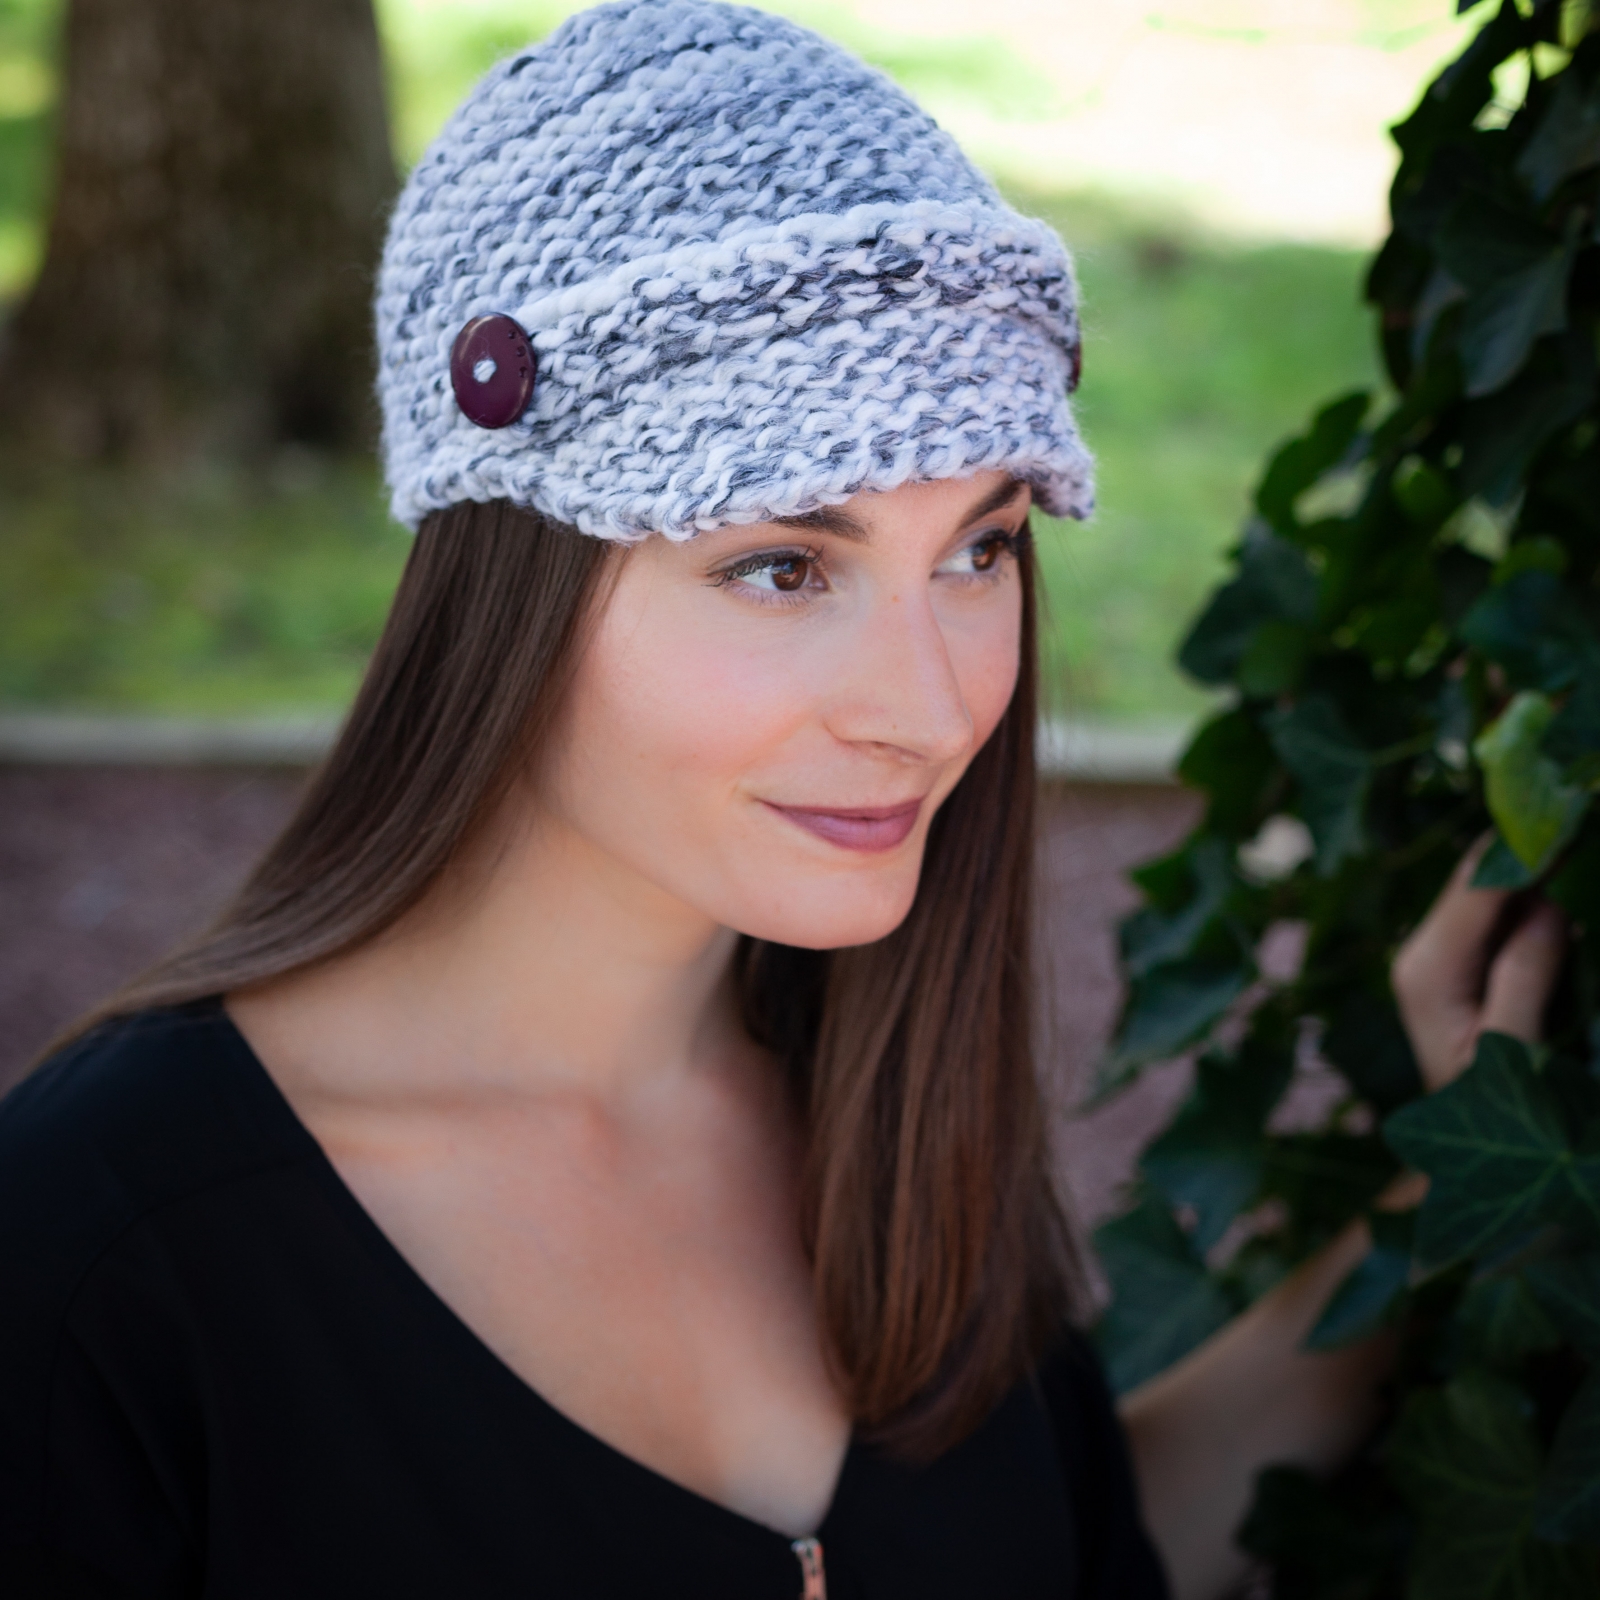 3 Loom Knitting Pattern Collection for Newsboy, Visor Hats